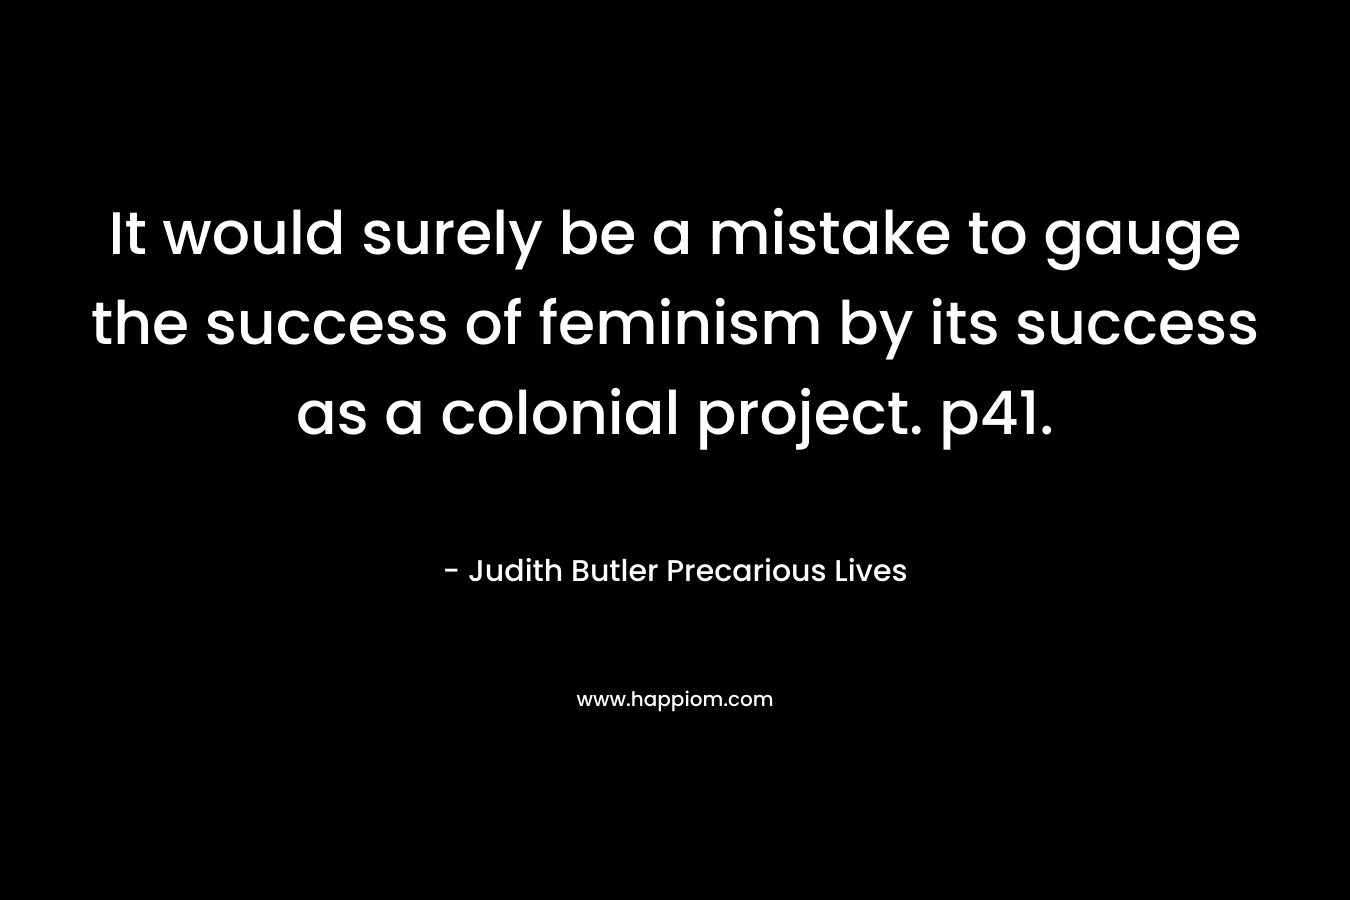 It would surely be a mistake to gauge the success of feminism by its success as a colonial project. p41.